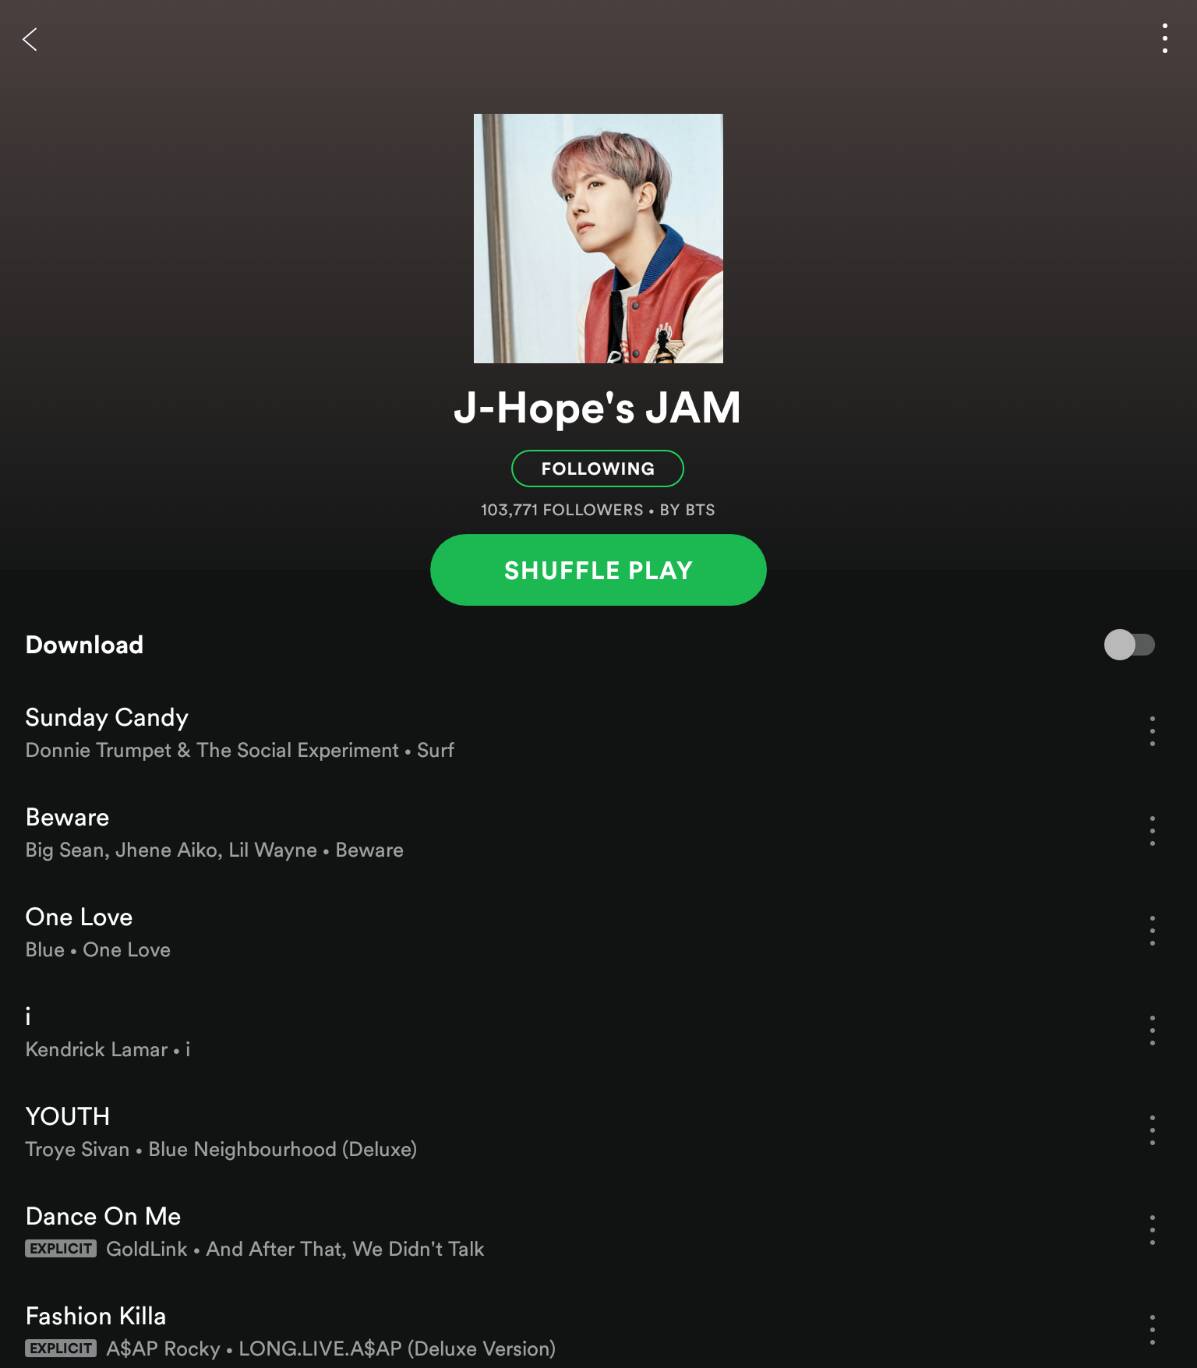 Link Bts Playlist On Spotify See more about bts, aesthetic and jimin. link bts playlist on spotify